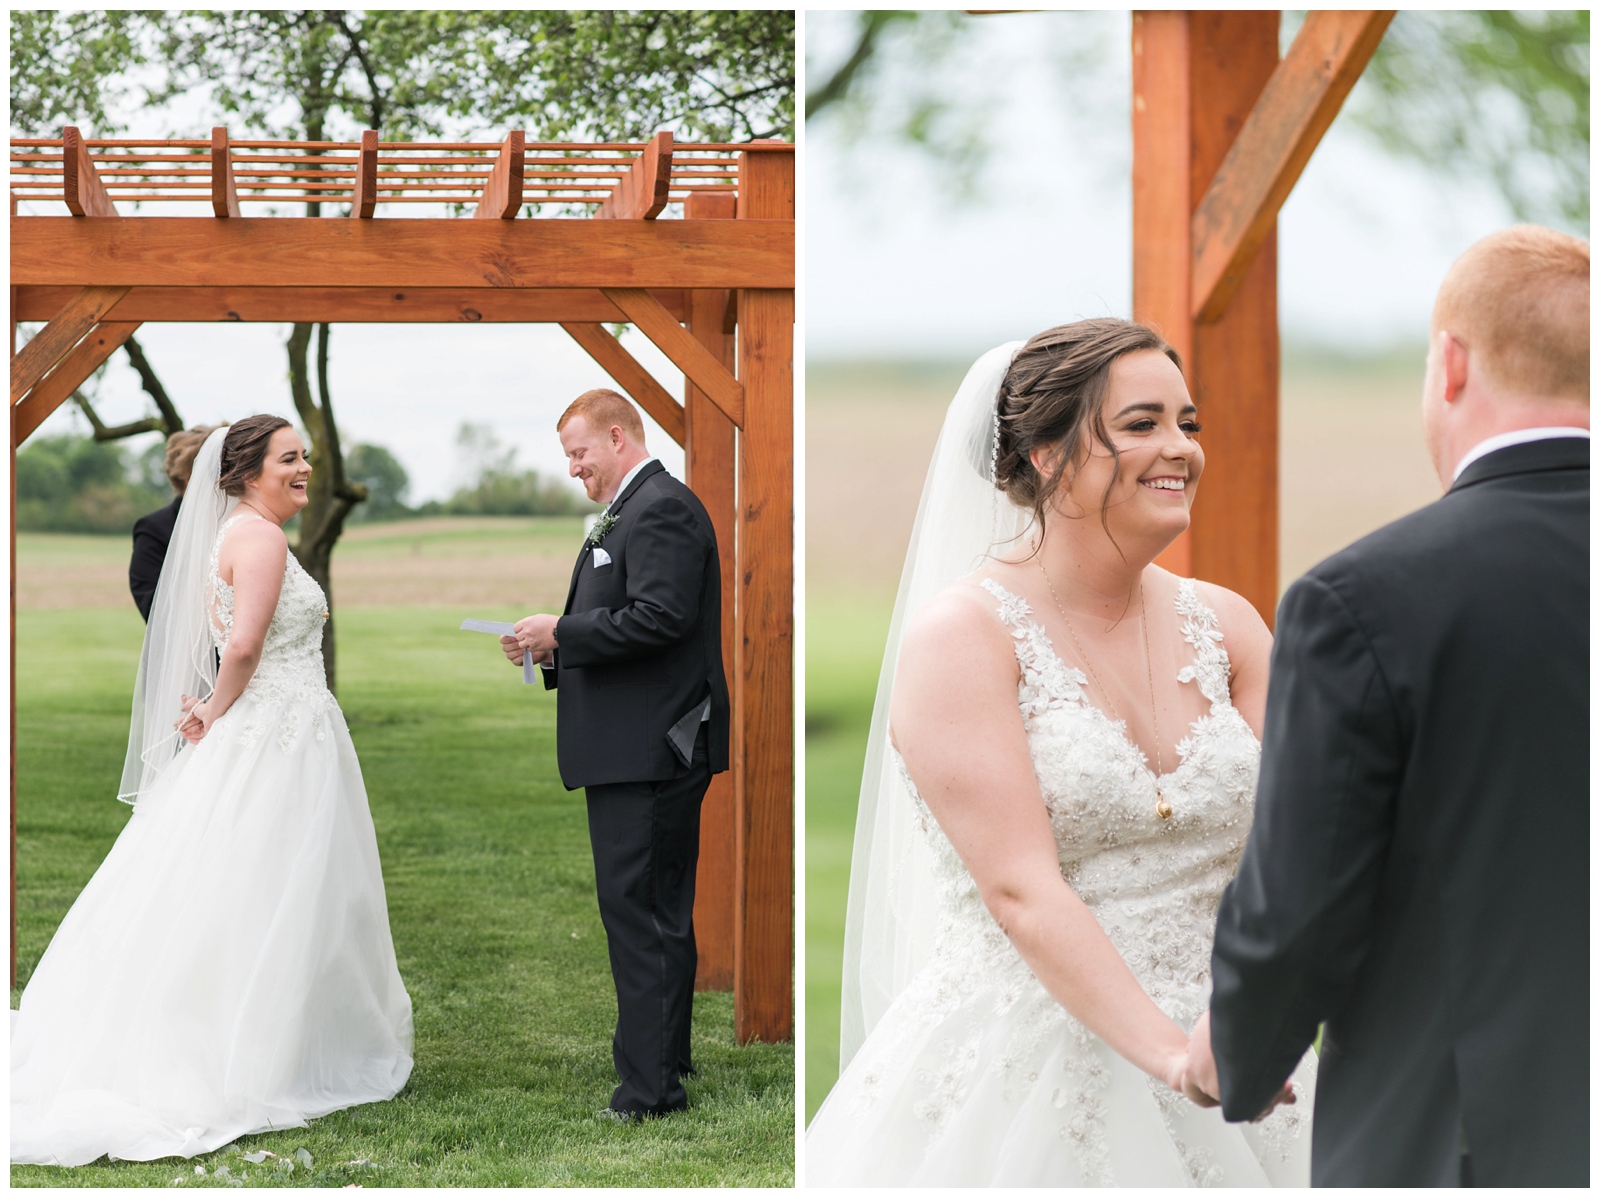 married couple exchanges vows under wooden arbor on Pretty Prairie Farms